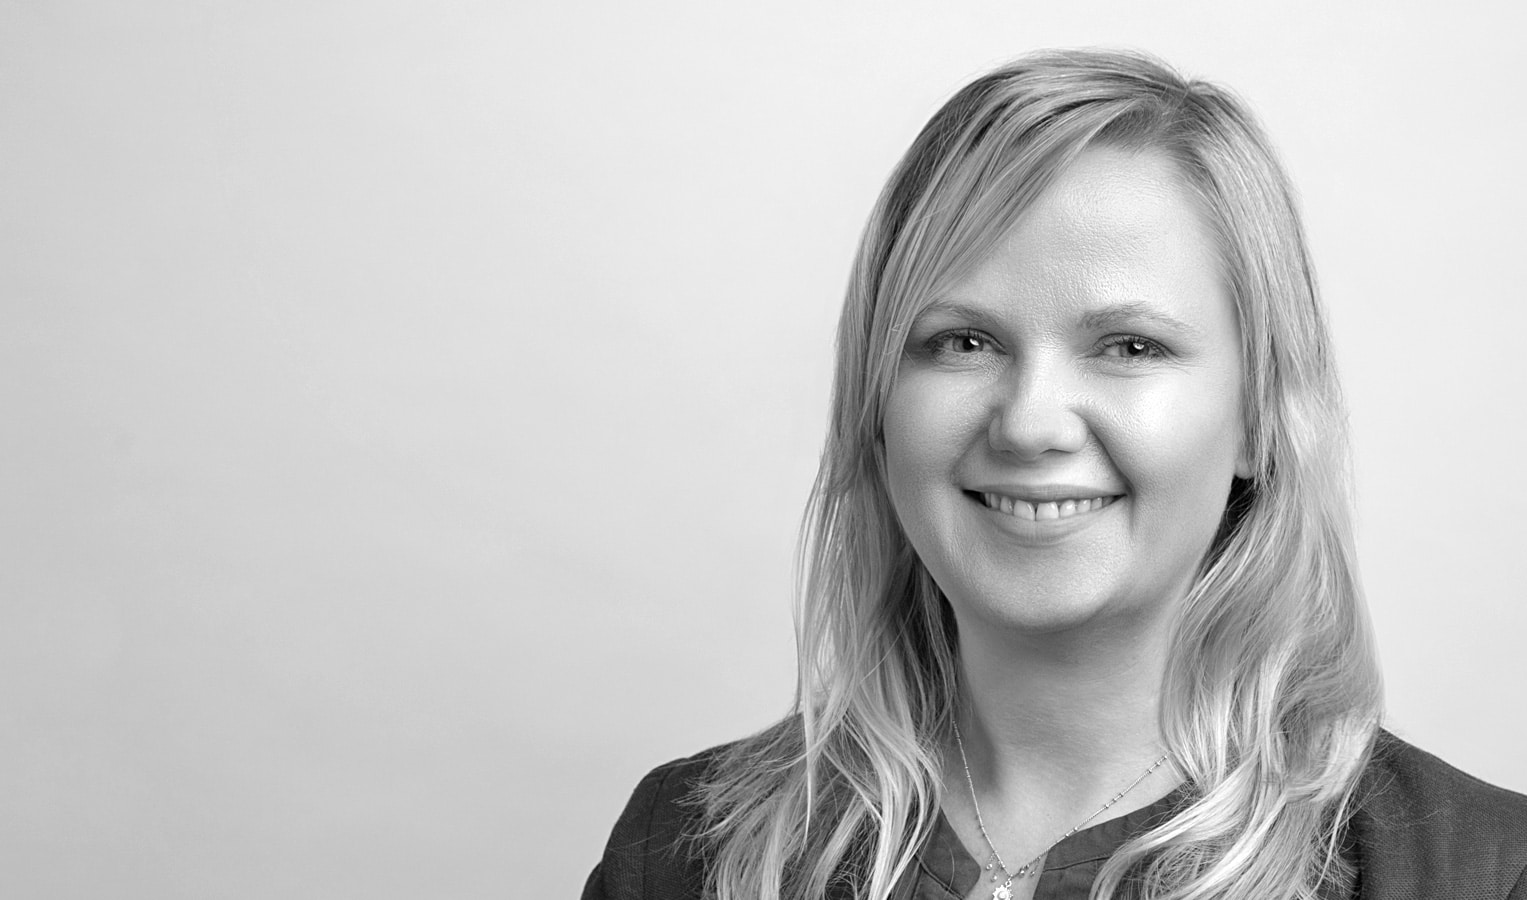 Sandpiper Appoints Saskia Kendall as Head of Public Affairs for Asia Pacific